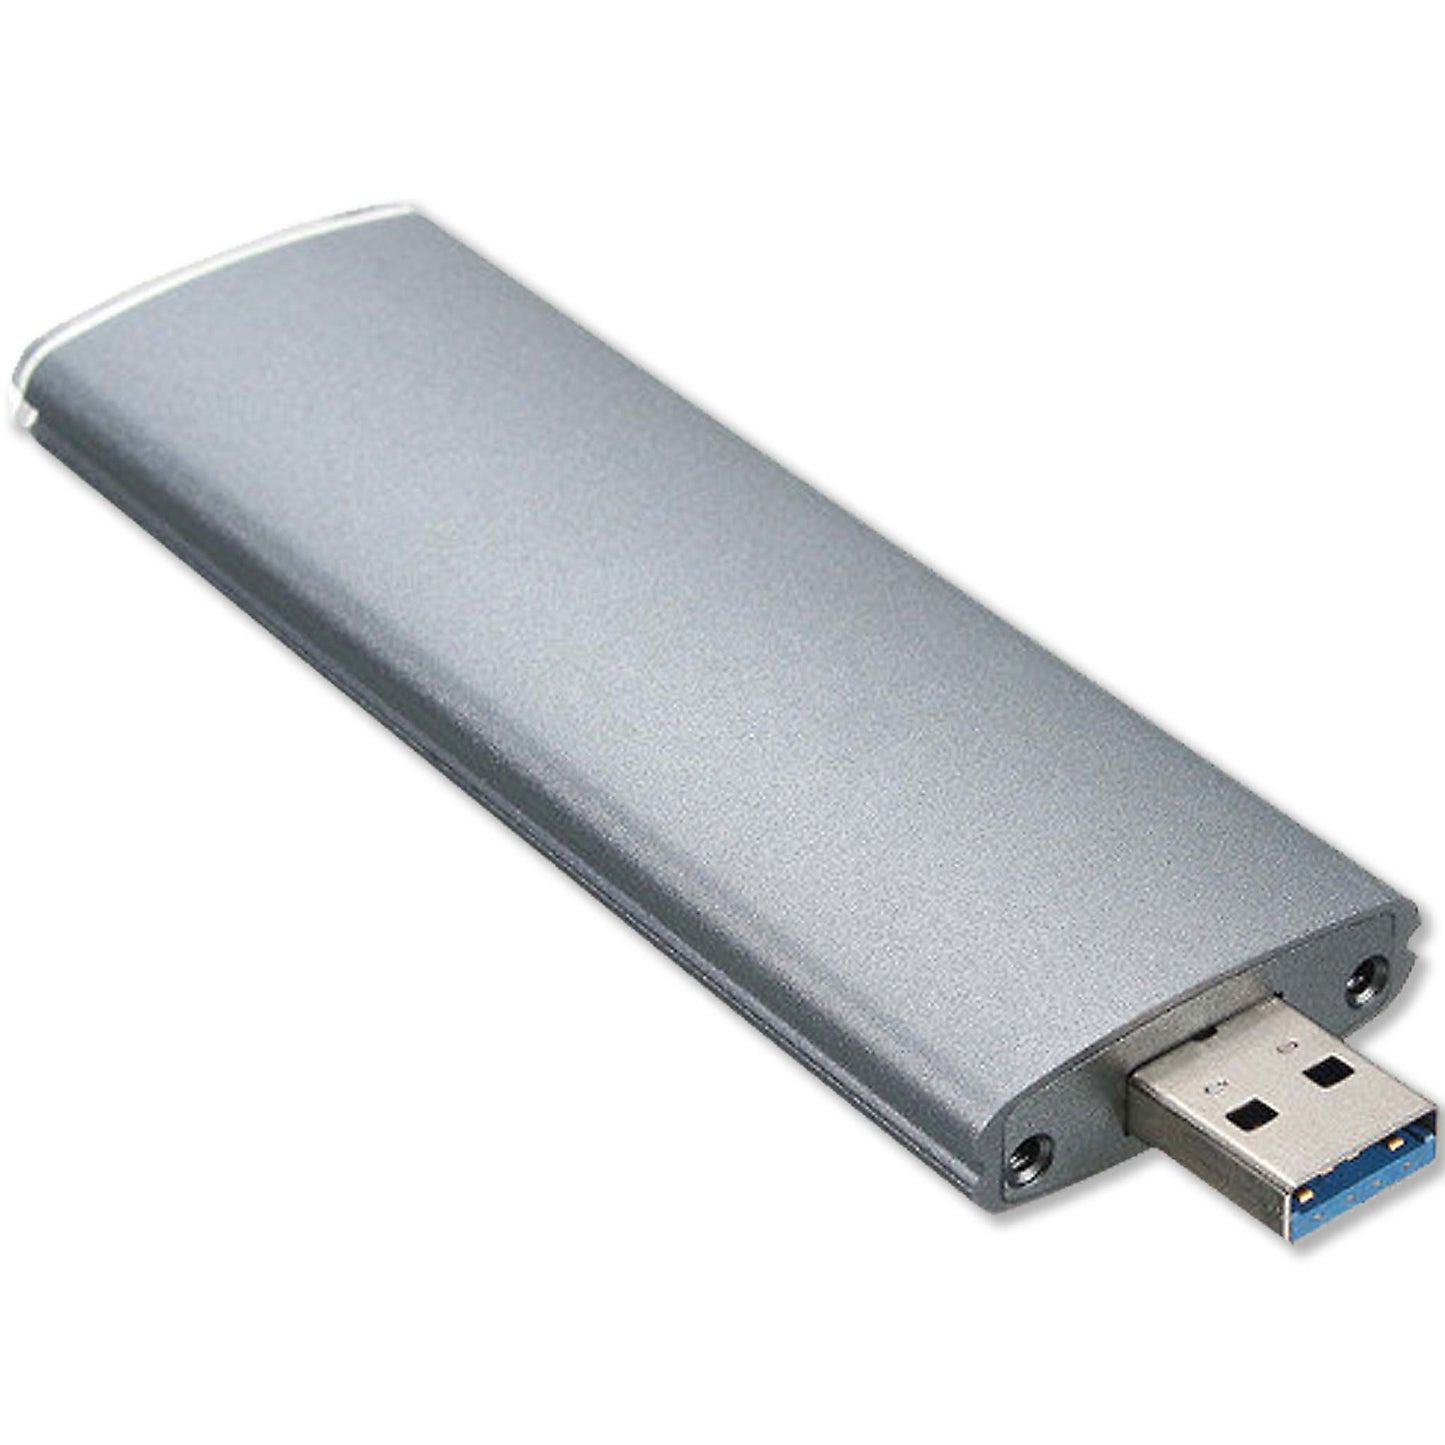 Penguin USB 3.0 Superspeed SSD Drive with Liberty Media